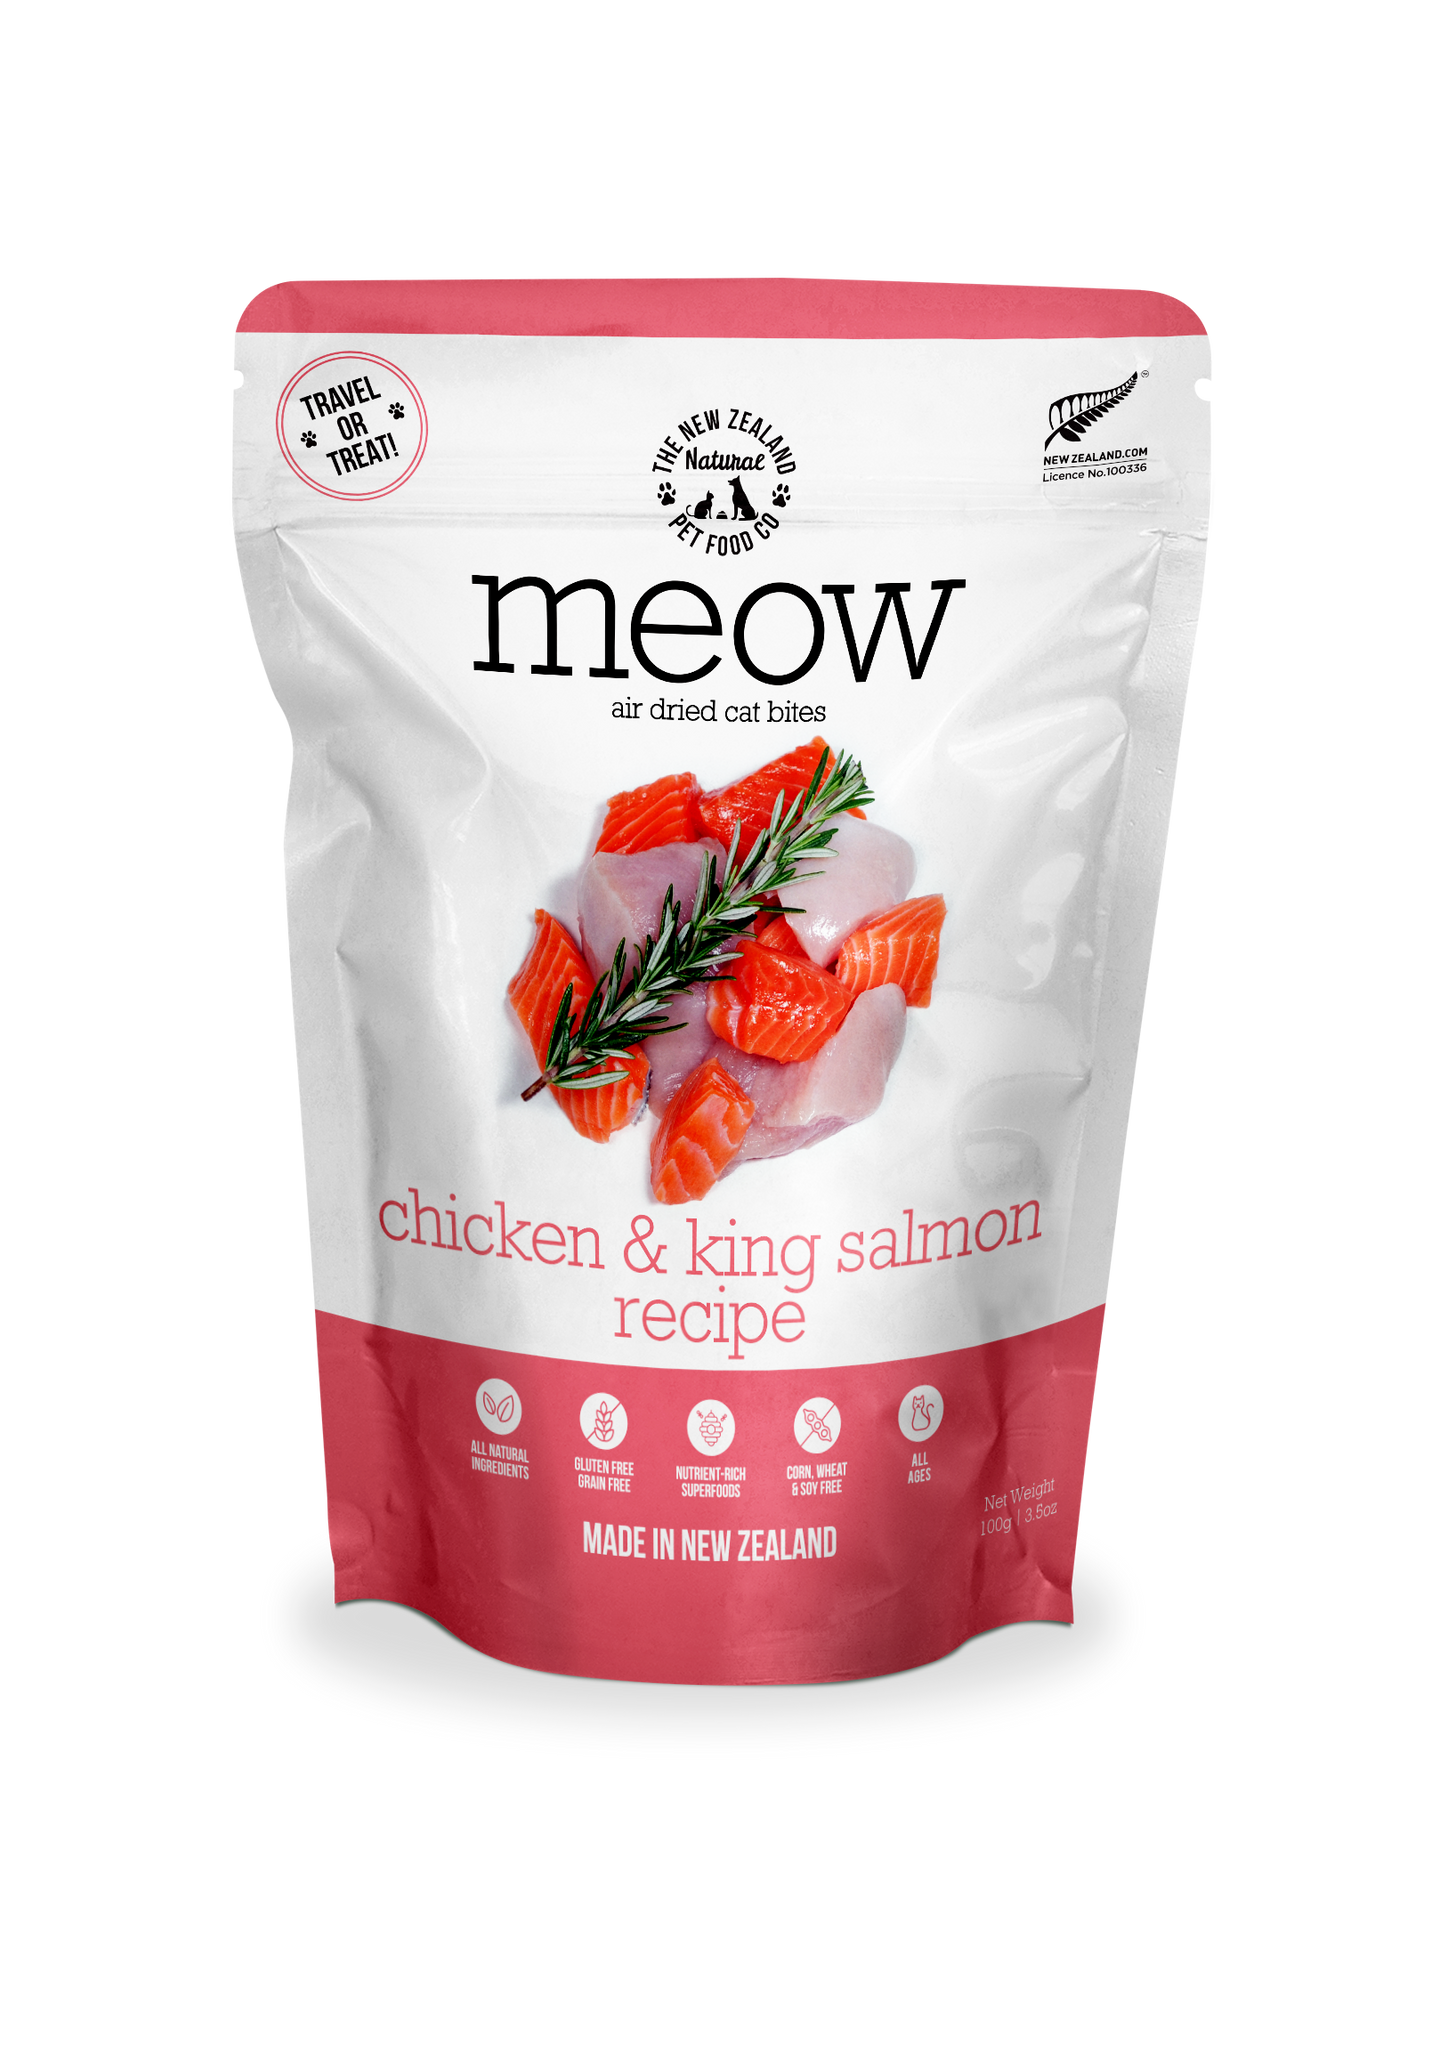 New Zealand Natural Air Dried Meow Chicken & King Salmon 3.5oz